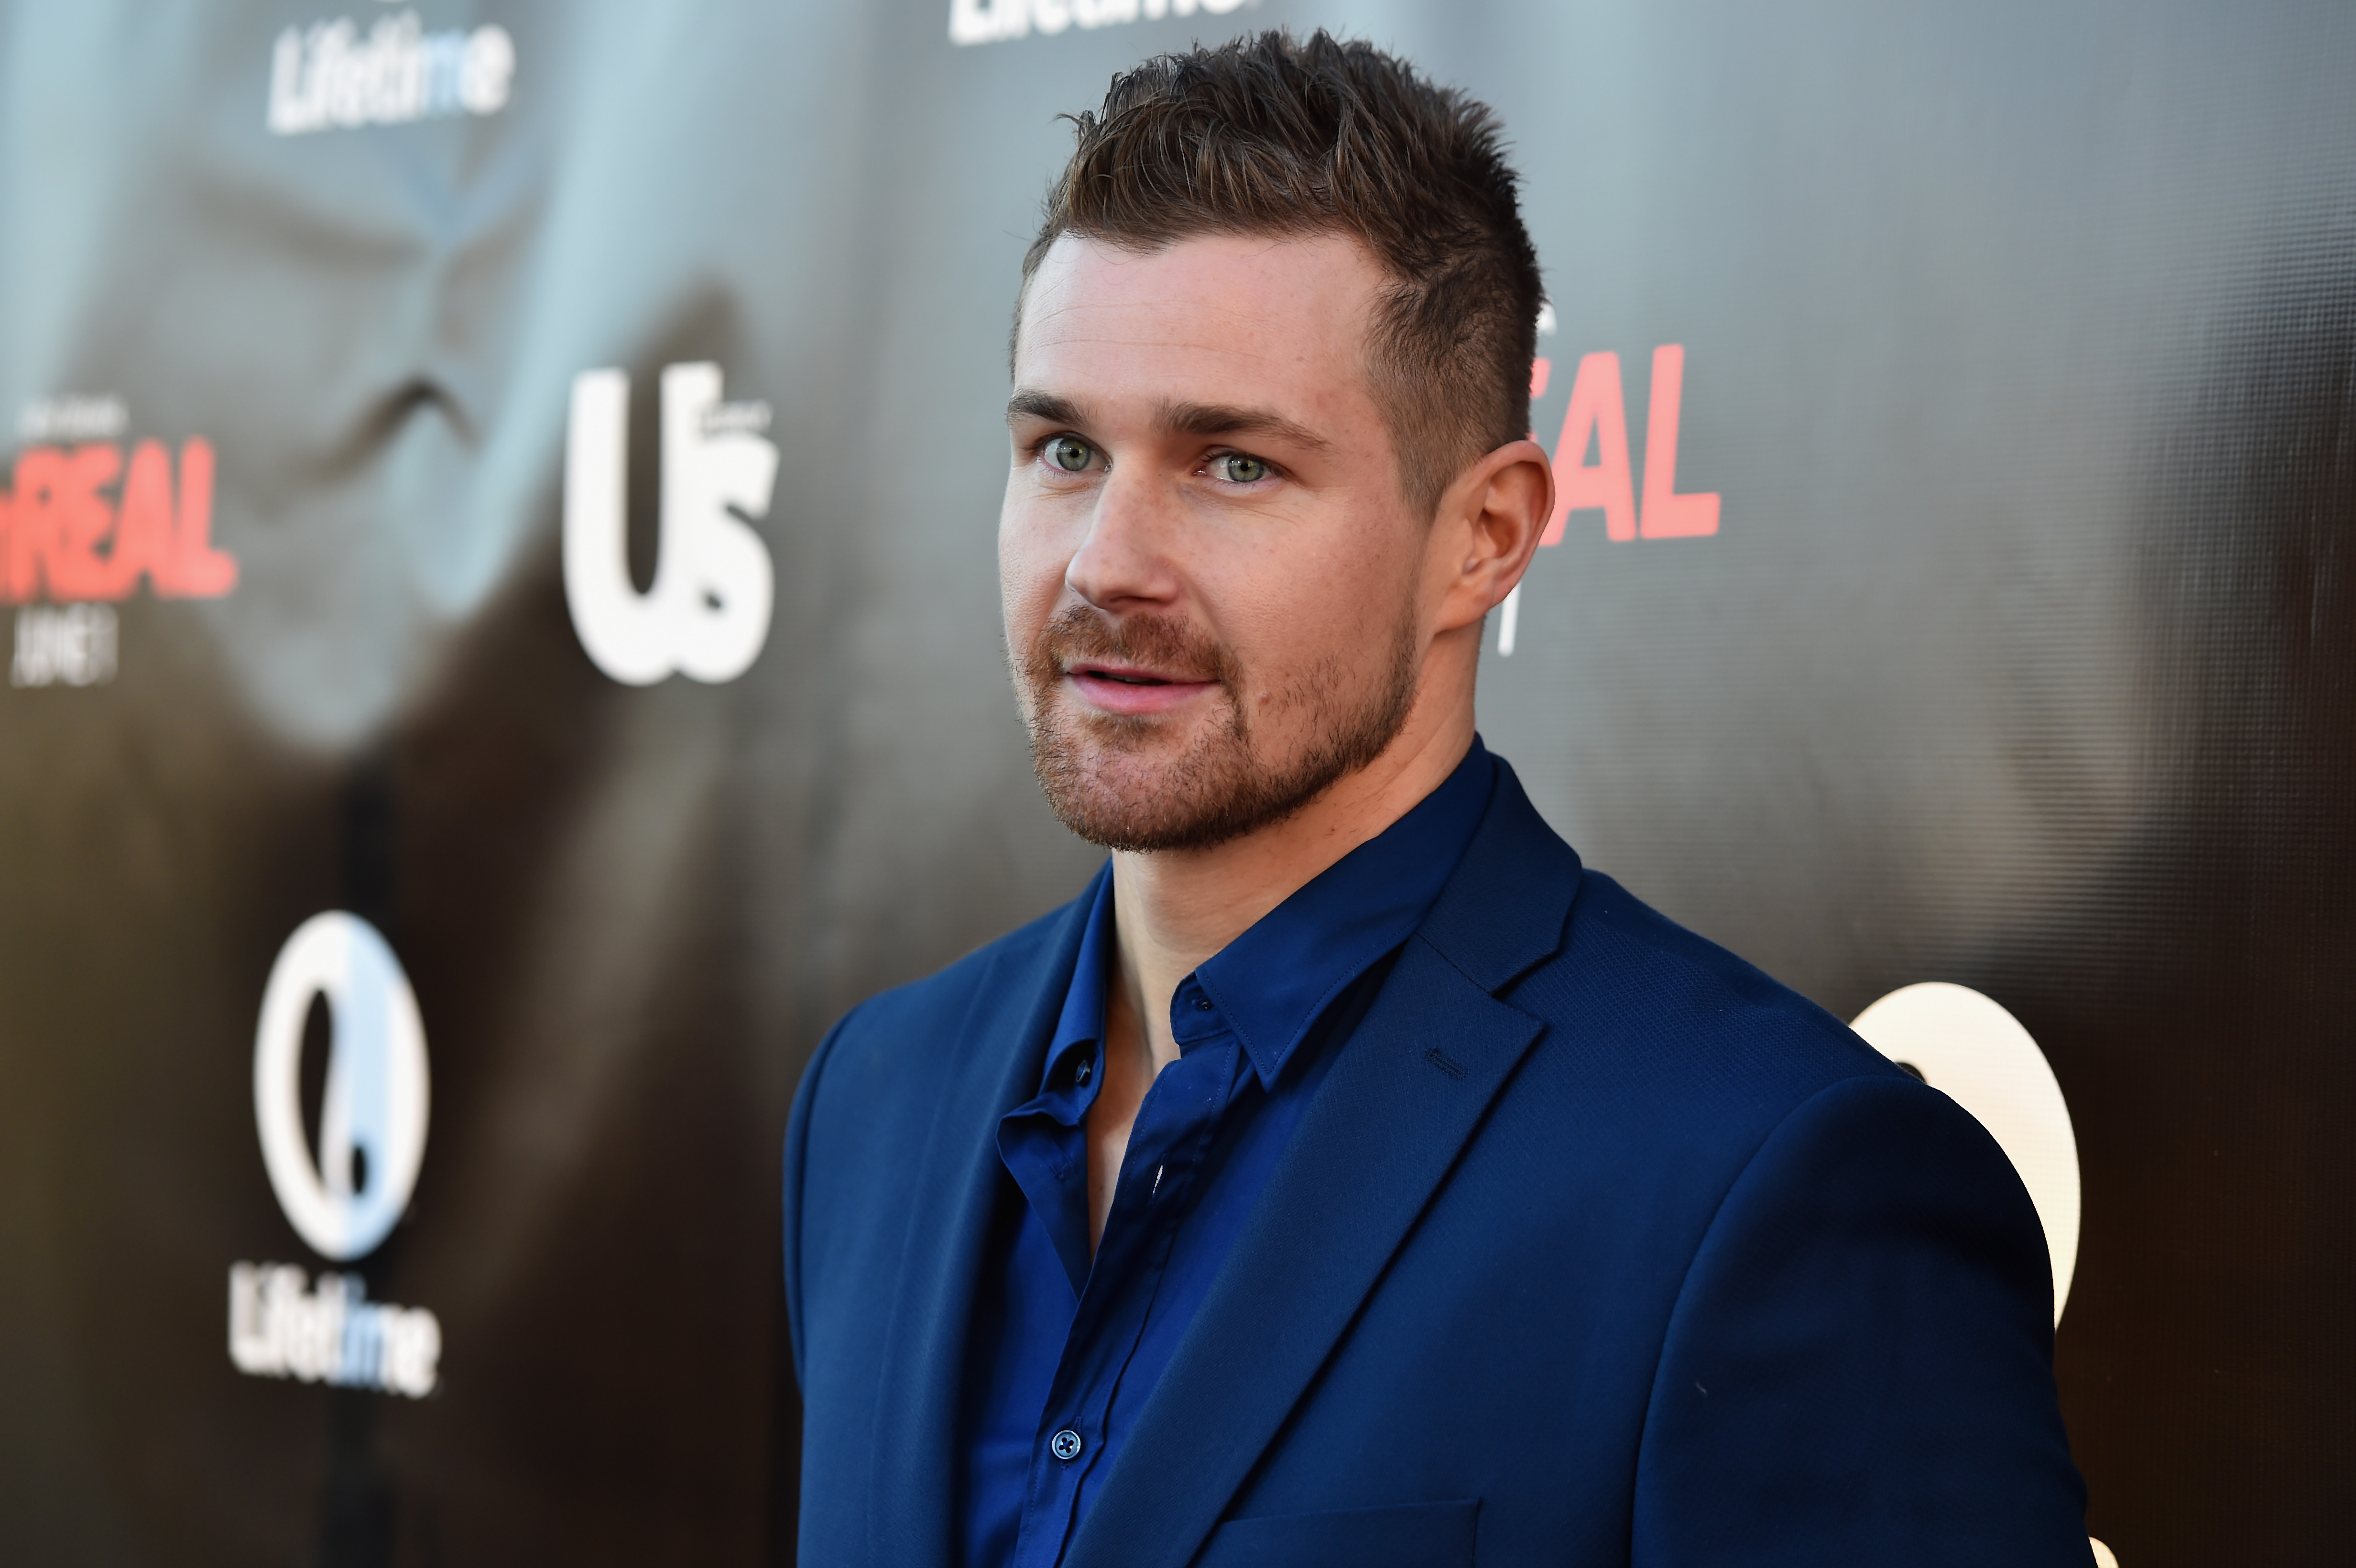 'General Hospital' actor Josh Kelly wearing a blue suit during a red carpet appearance.